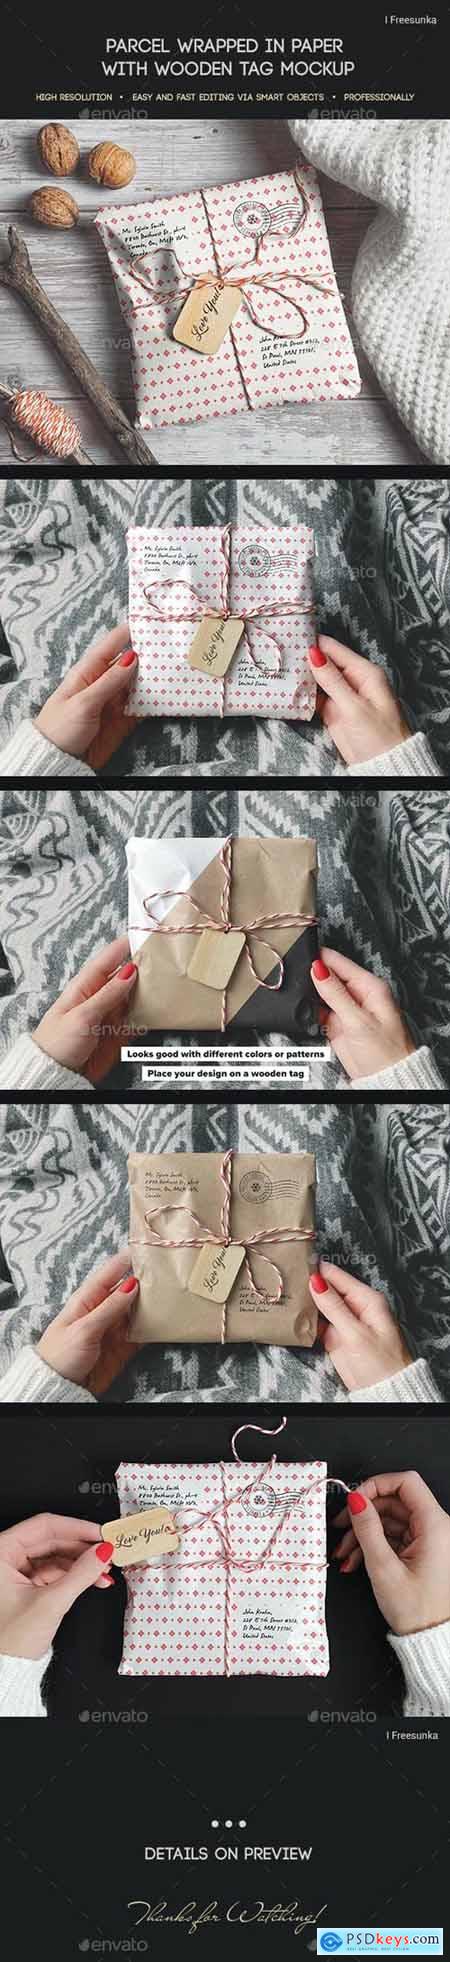 Parcel Wrapped In Paper With Wooden Tag Mockup - 29385413